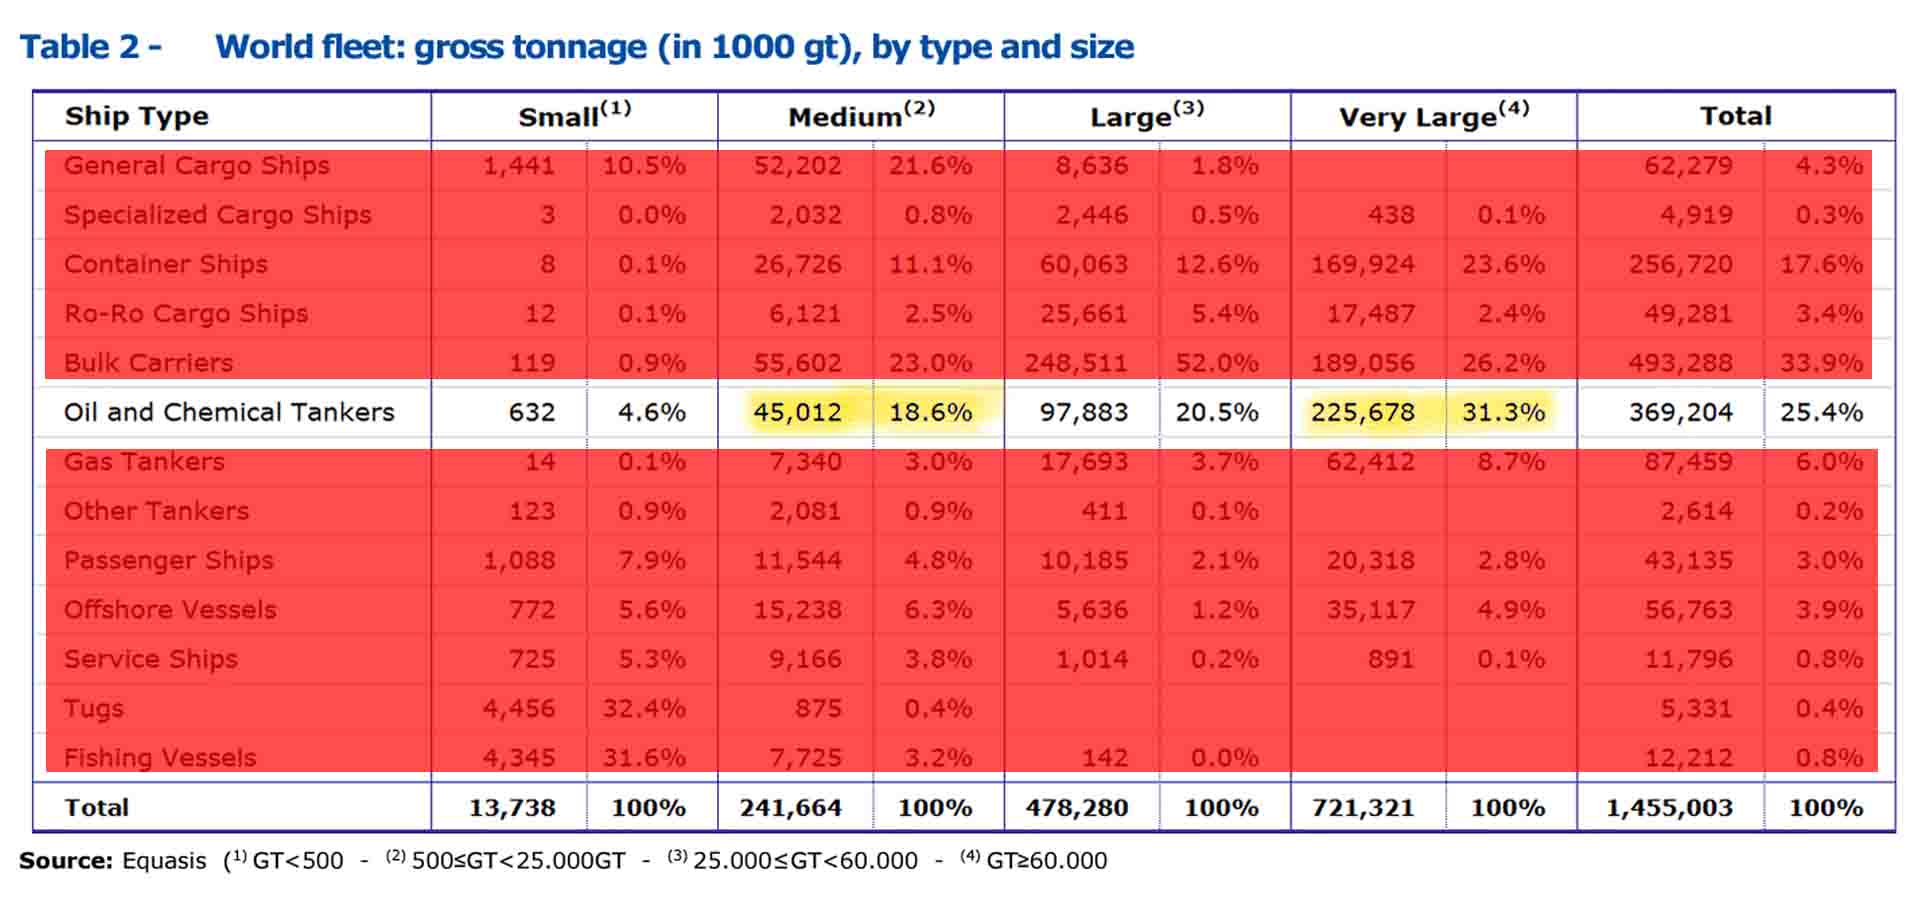 The oil and chemical tankers in the very large category comprise 31.3% or has the biggest volume in gross tonnage across all other ship types.